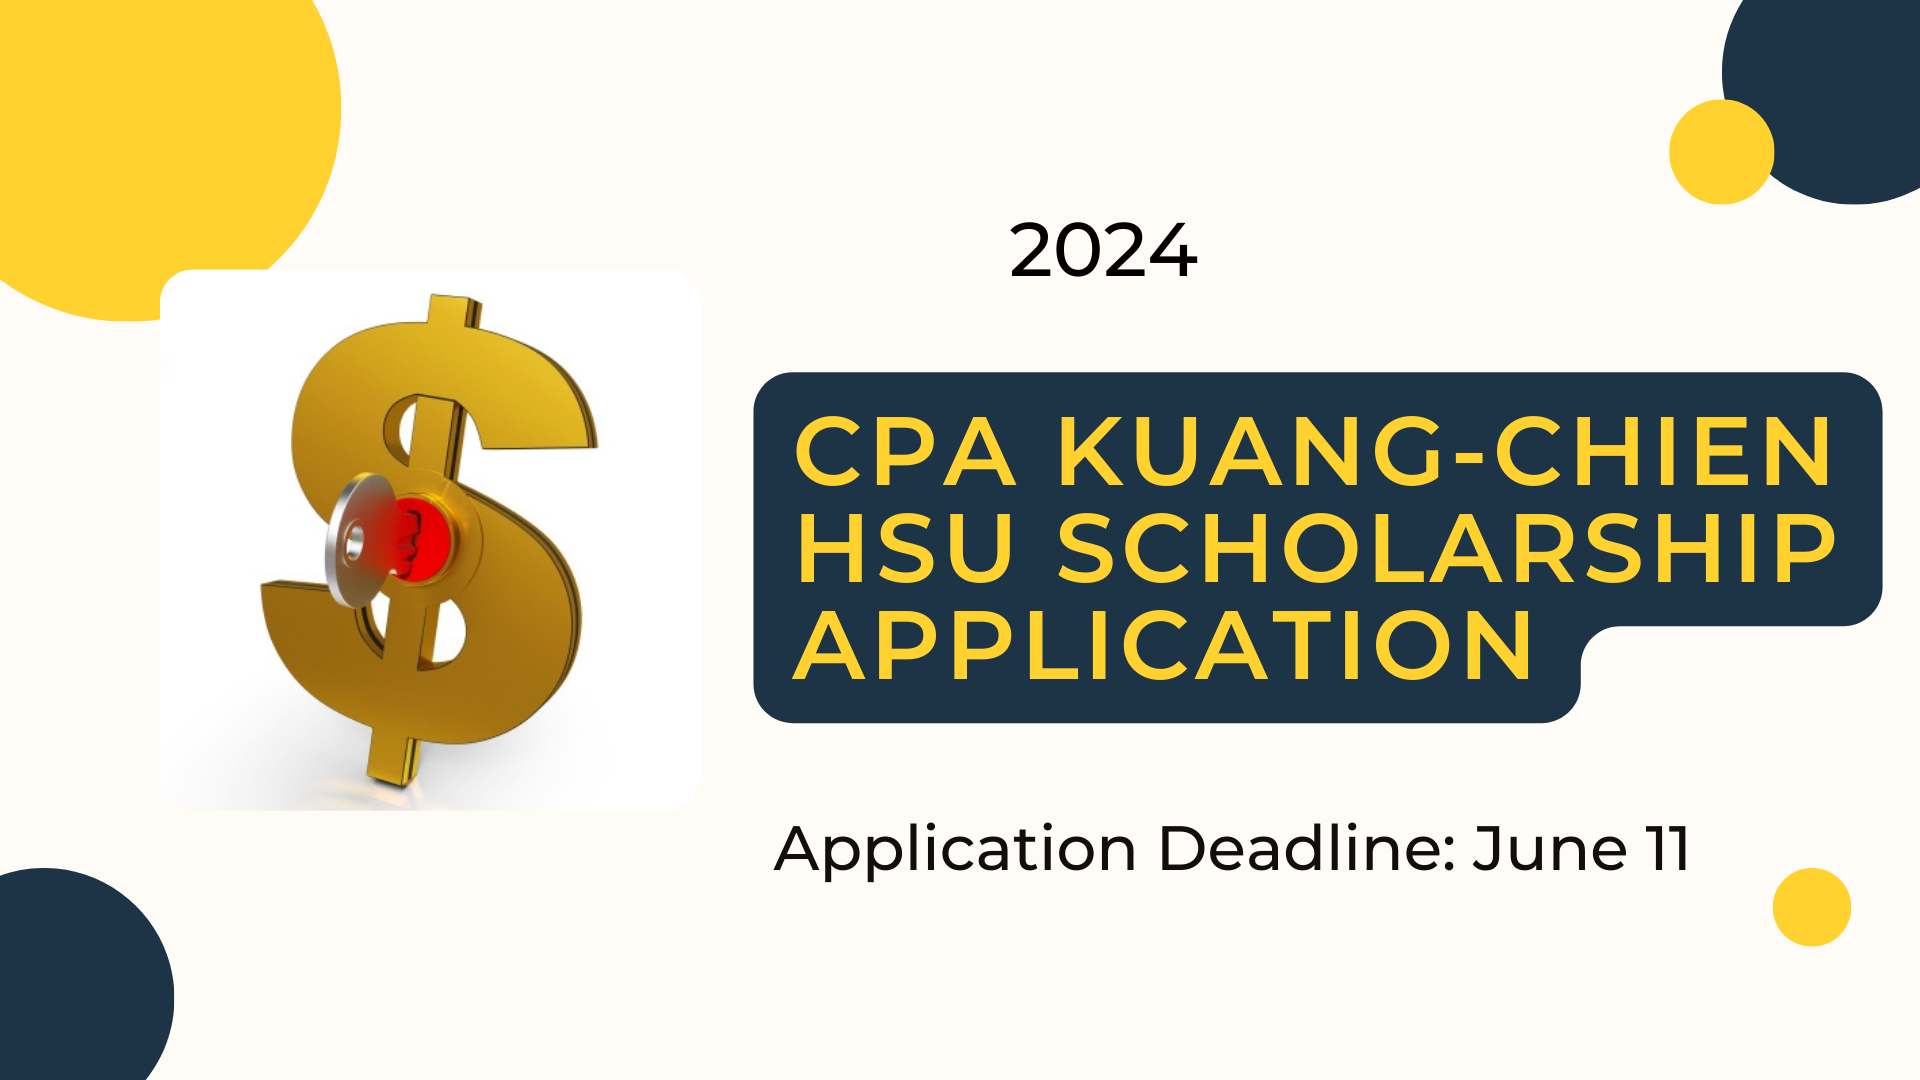 Featured image for “The application for the CPA Kuang-Chien Hsu Scholarship now begins.”